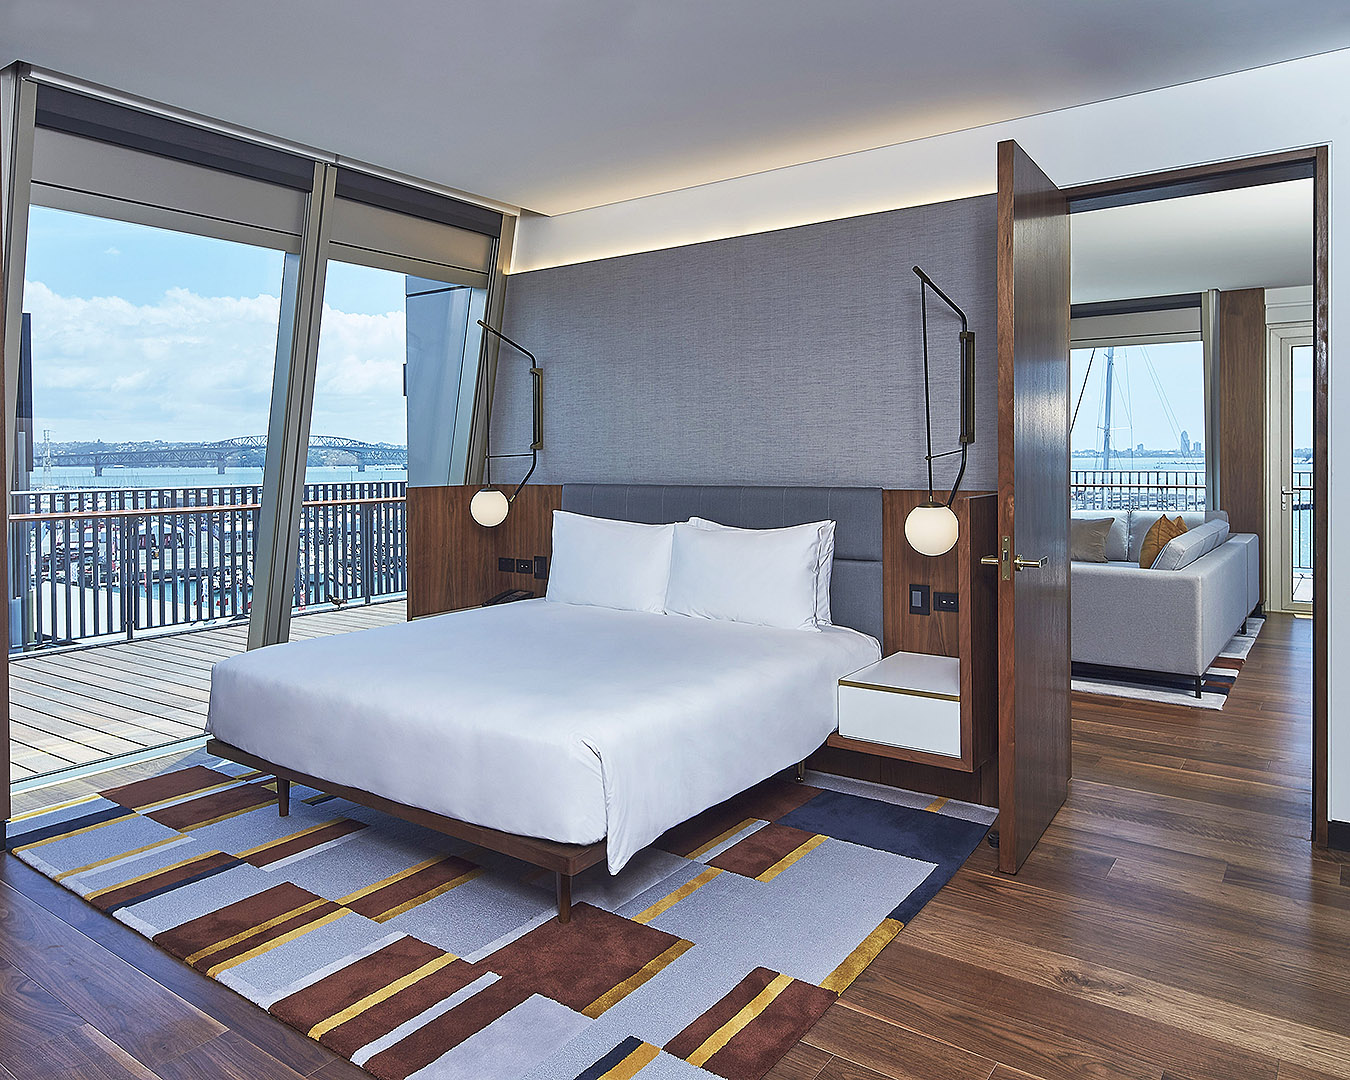 The executive room suite at Park Hyatt shows a bed with amazing views.